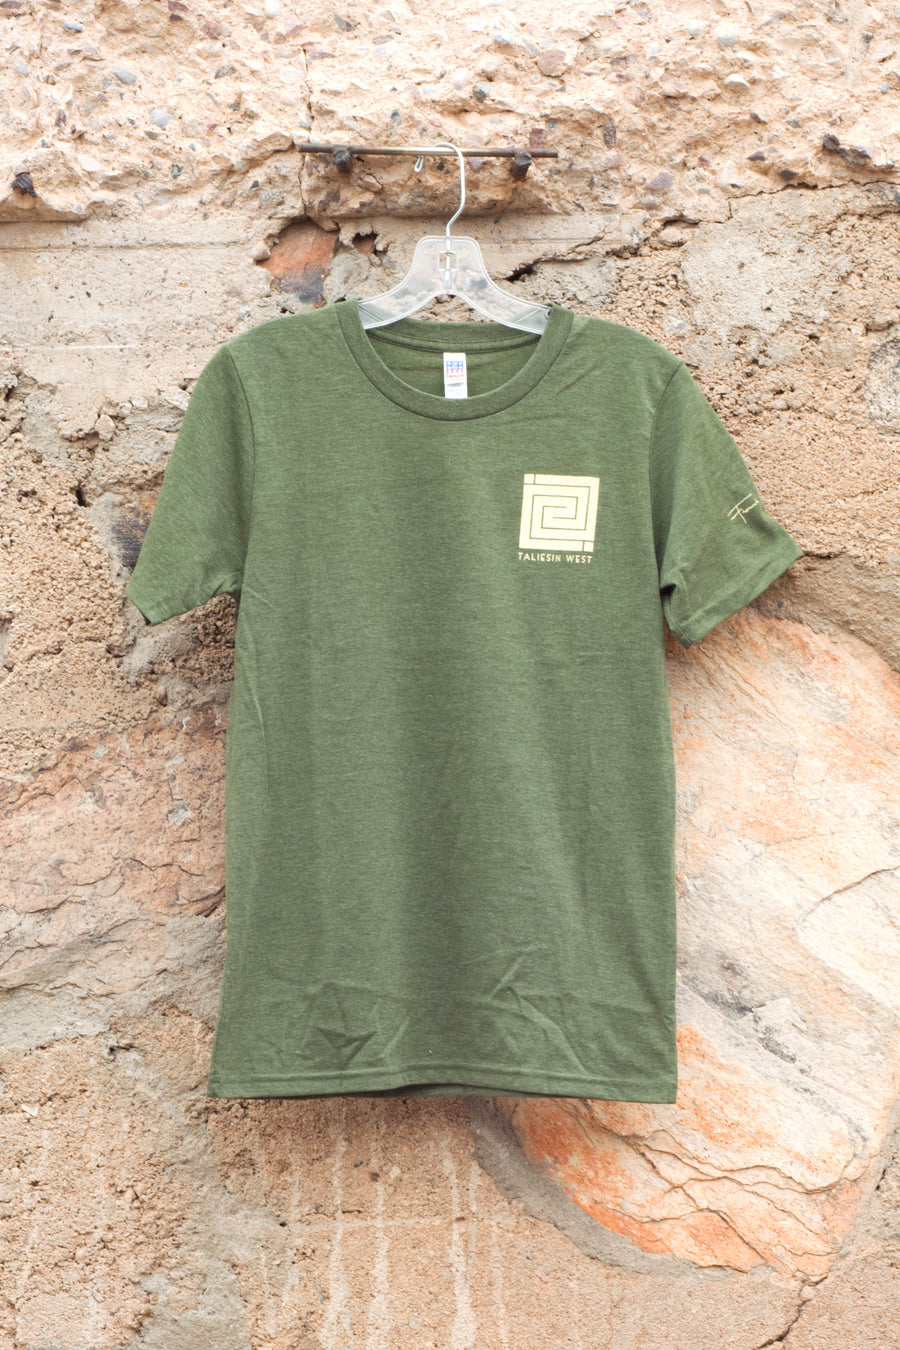 Image shows front of T-shirt with off-white Whirling Arrow on left.